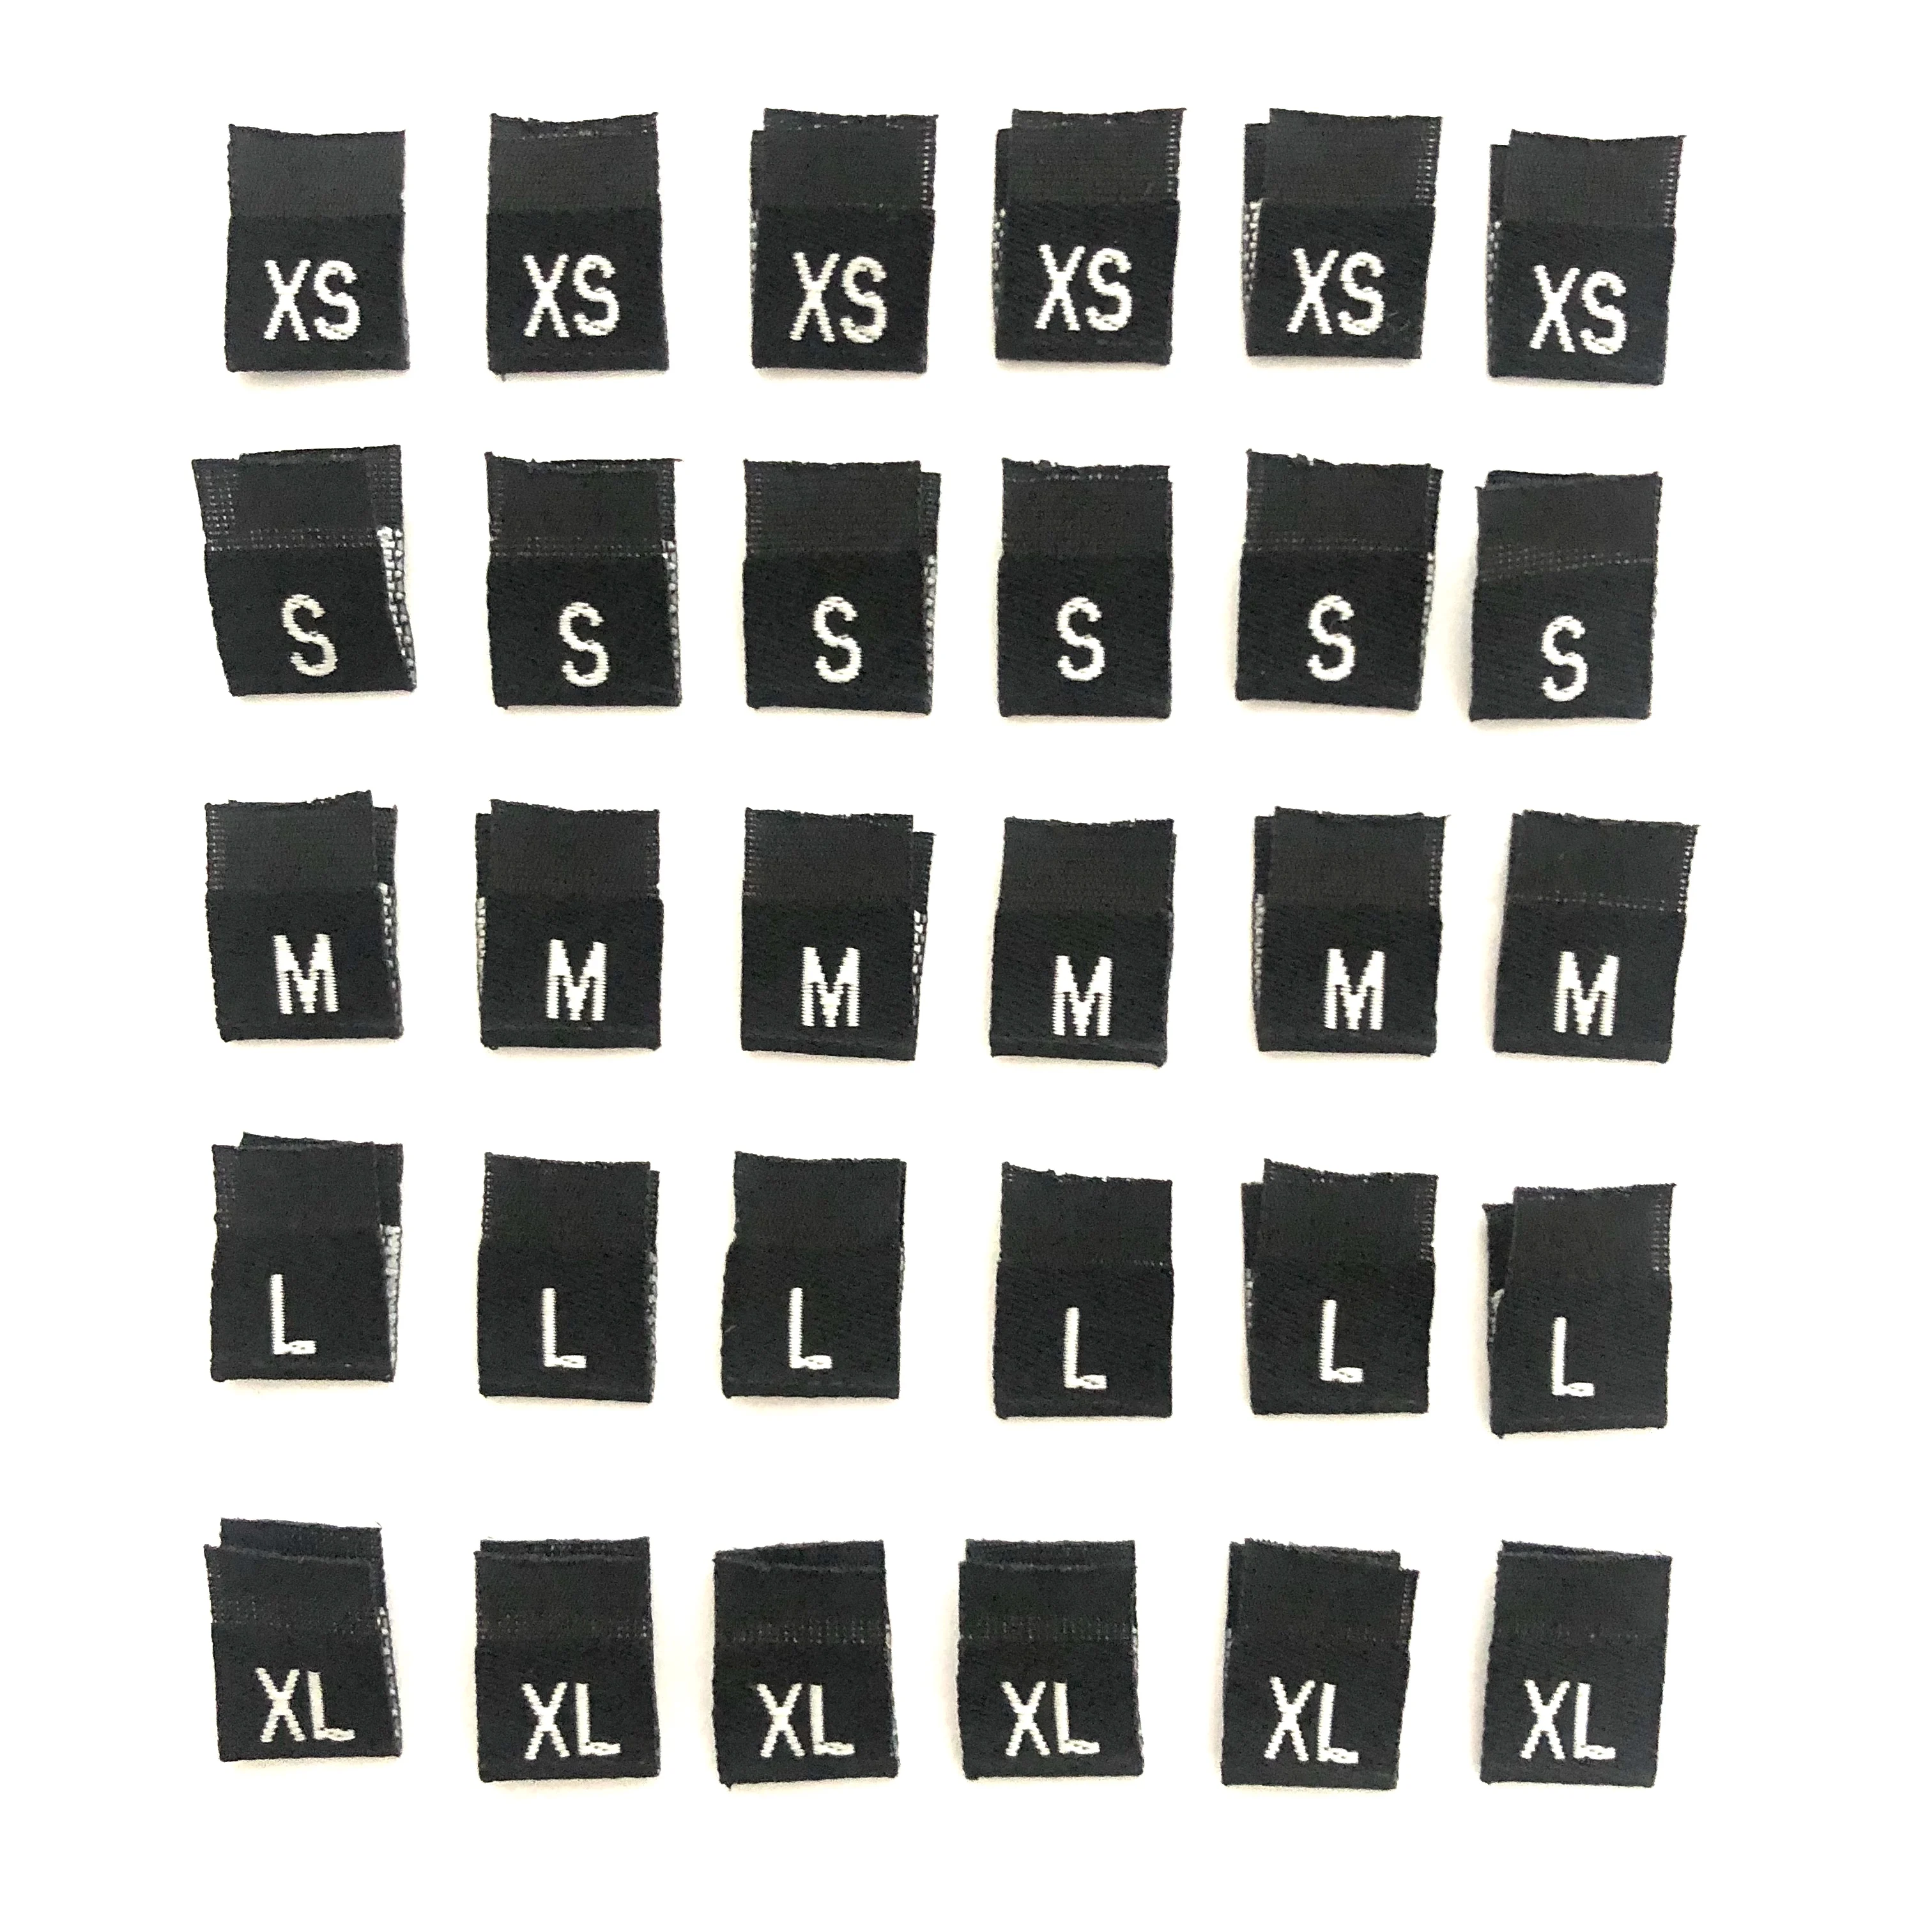 S M L Xl Xxl Xxxl Size Label Tags Woven Clothing Labels Size Tags - Buy ...